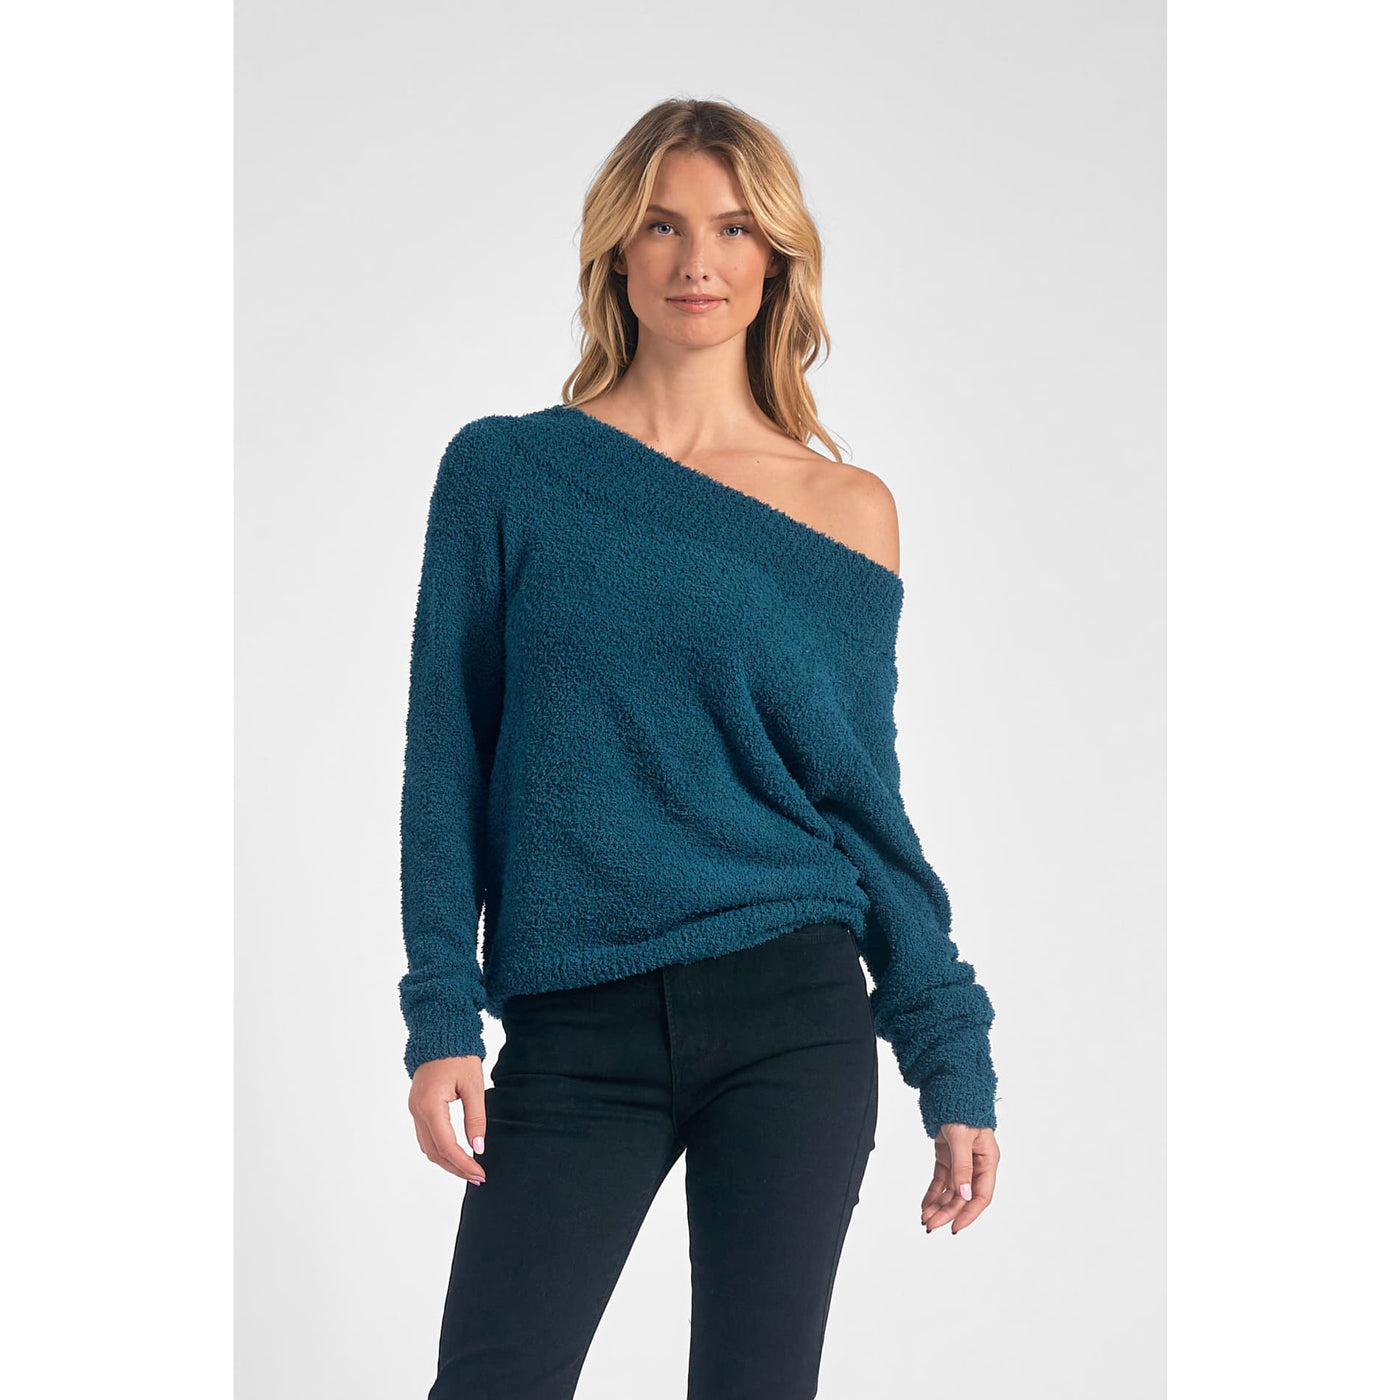 Keeping Dreams Alive Sweater - 130 Sweaters/Cardigans